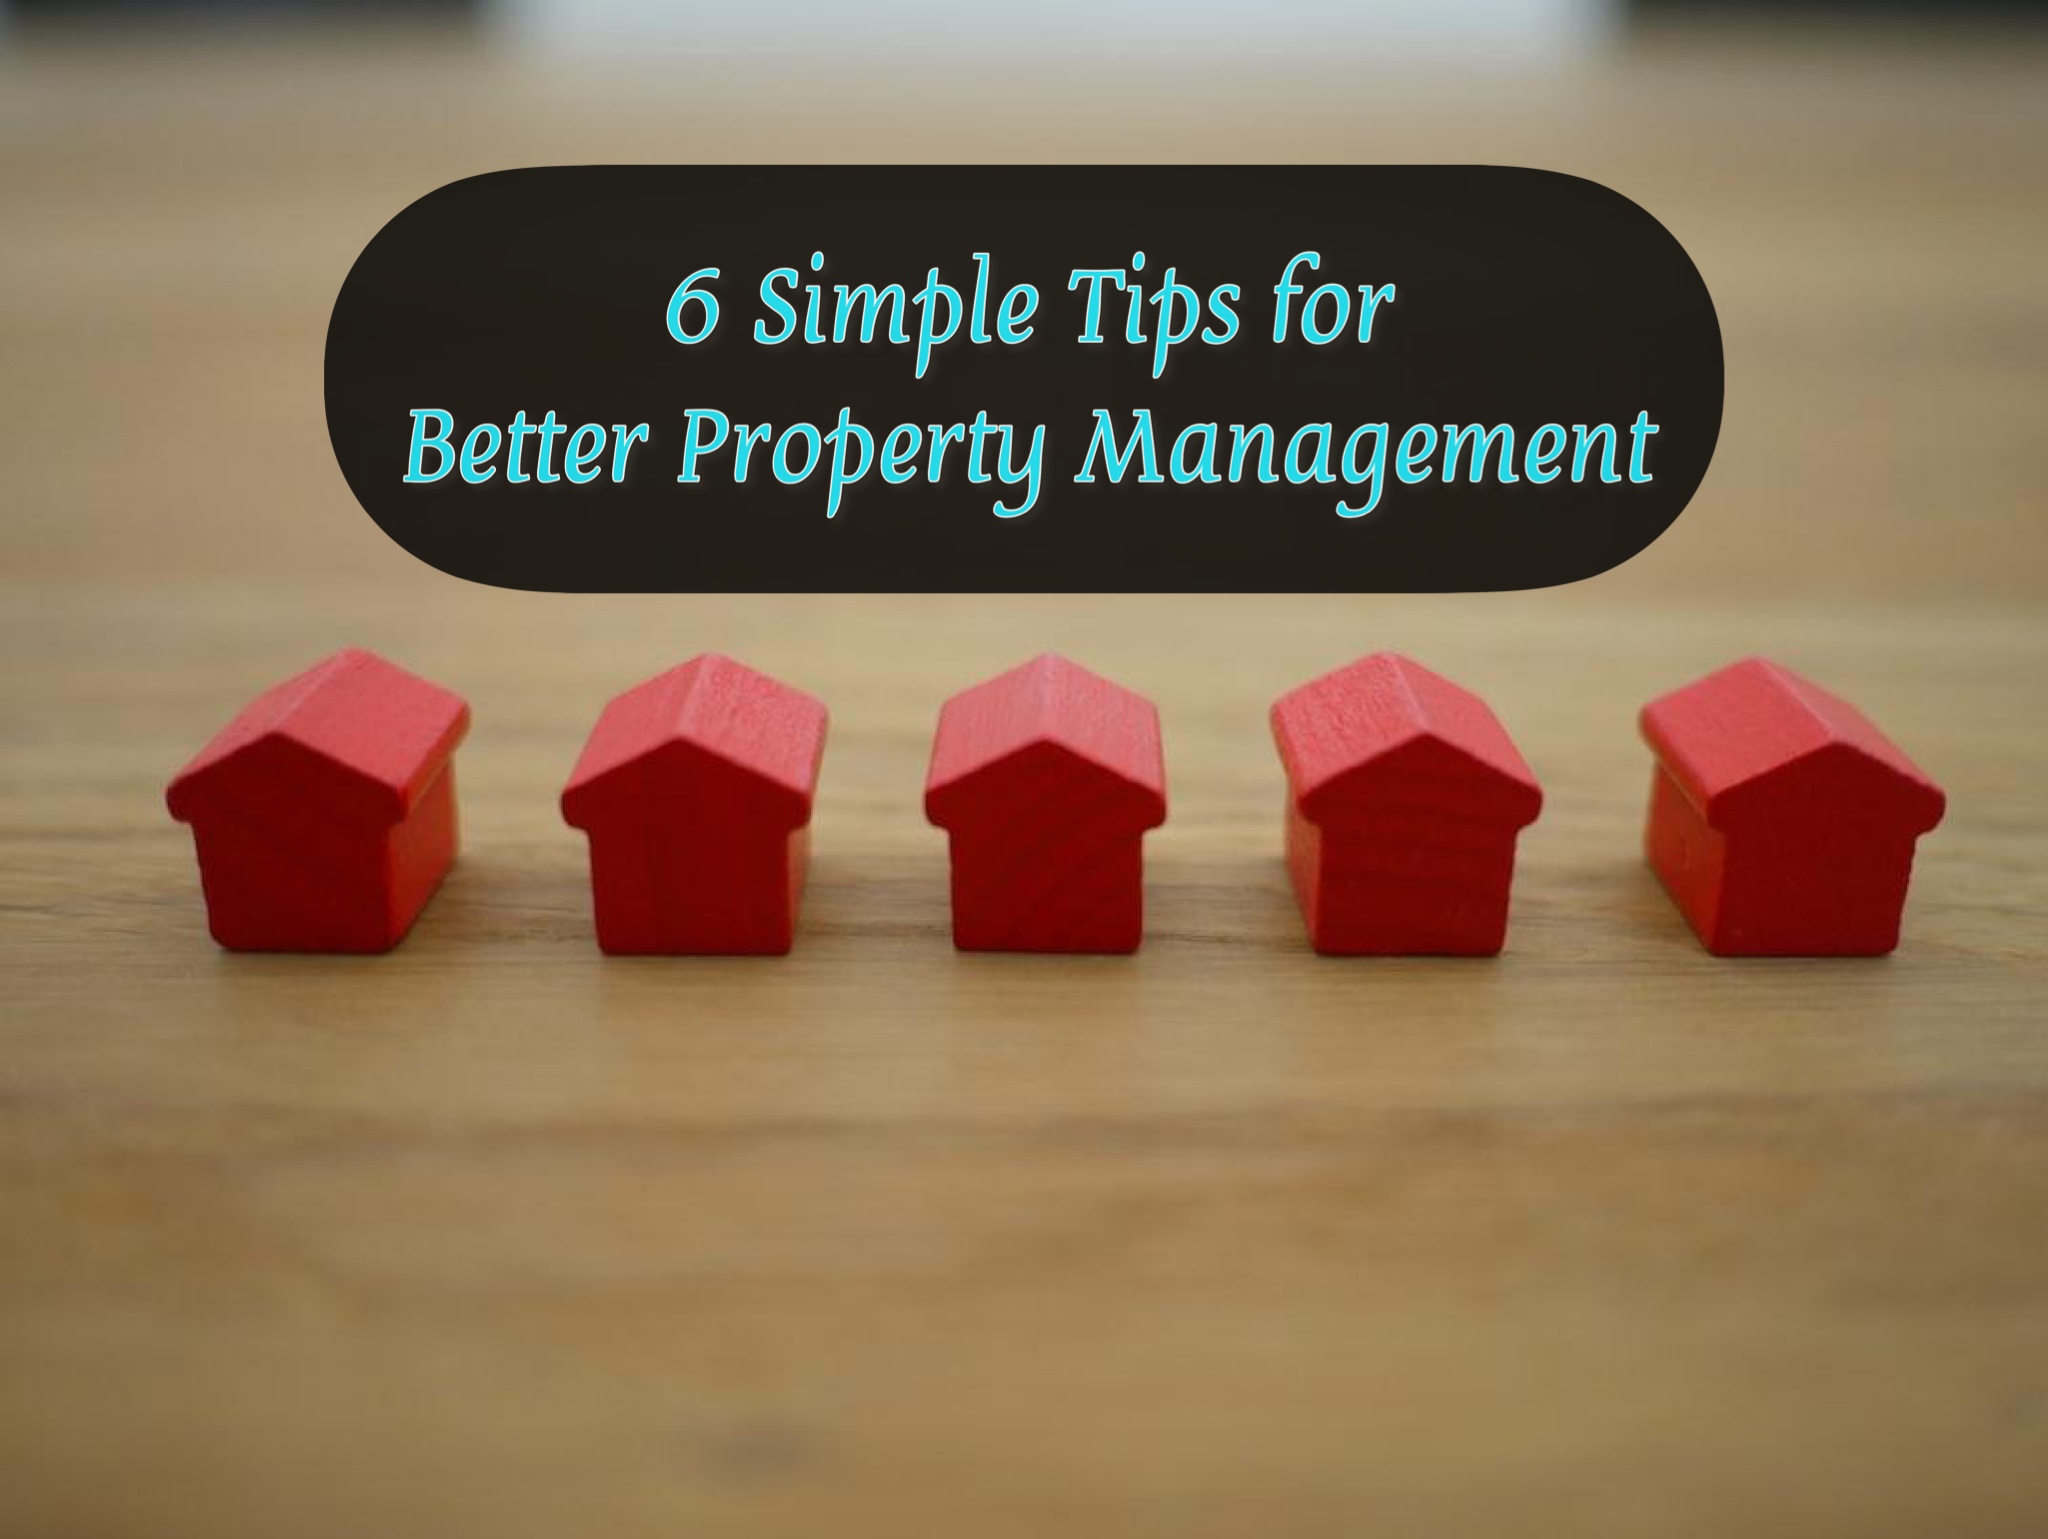 6 Simple Tips for Better Property Management